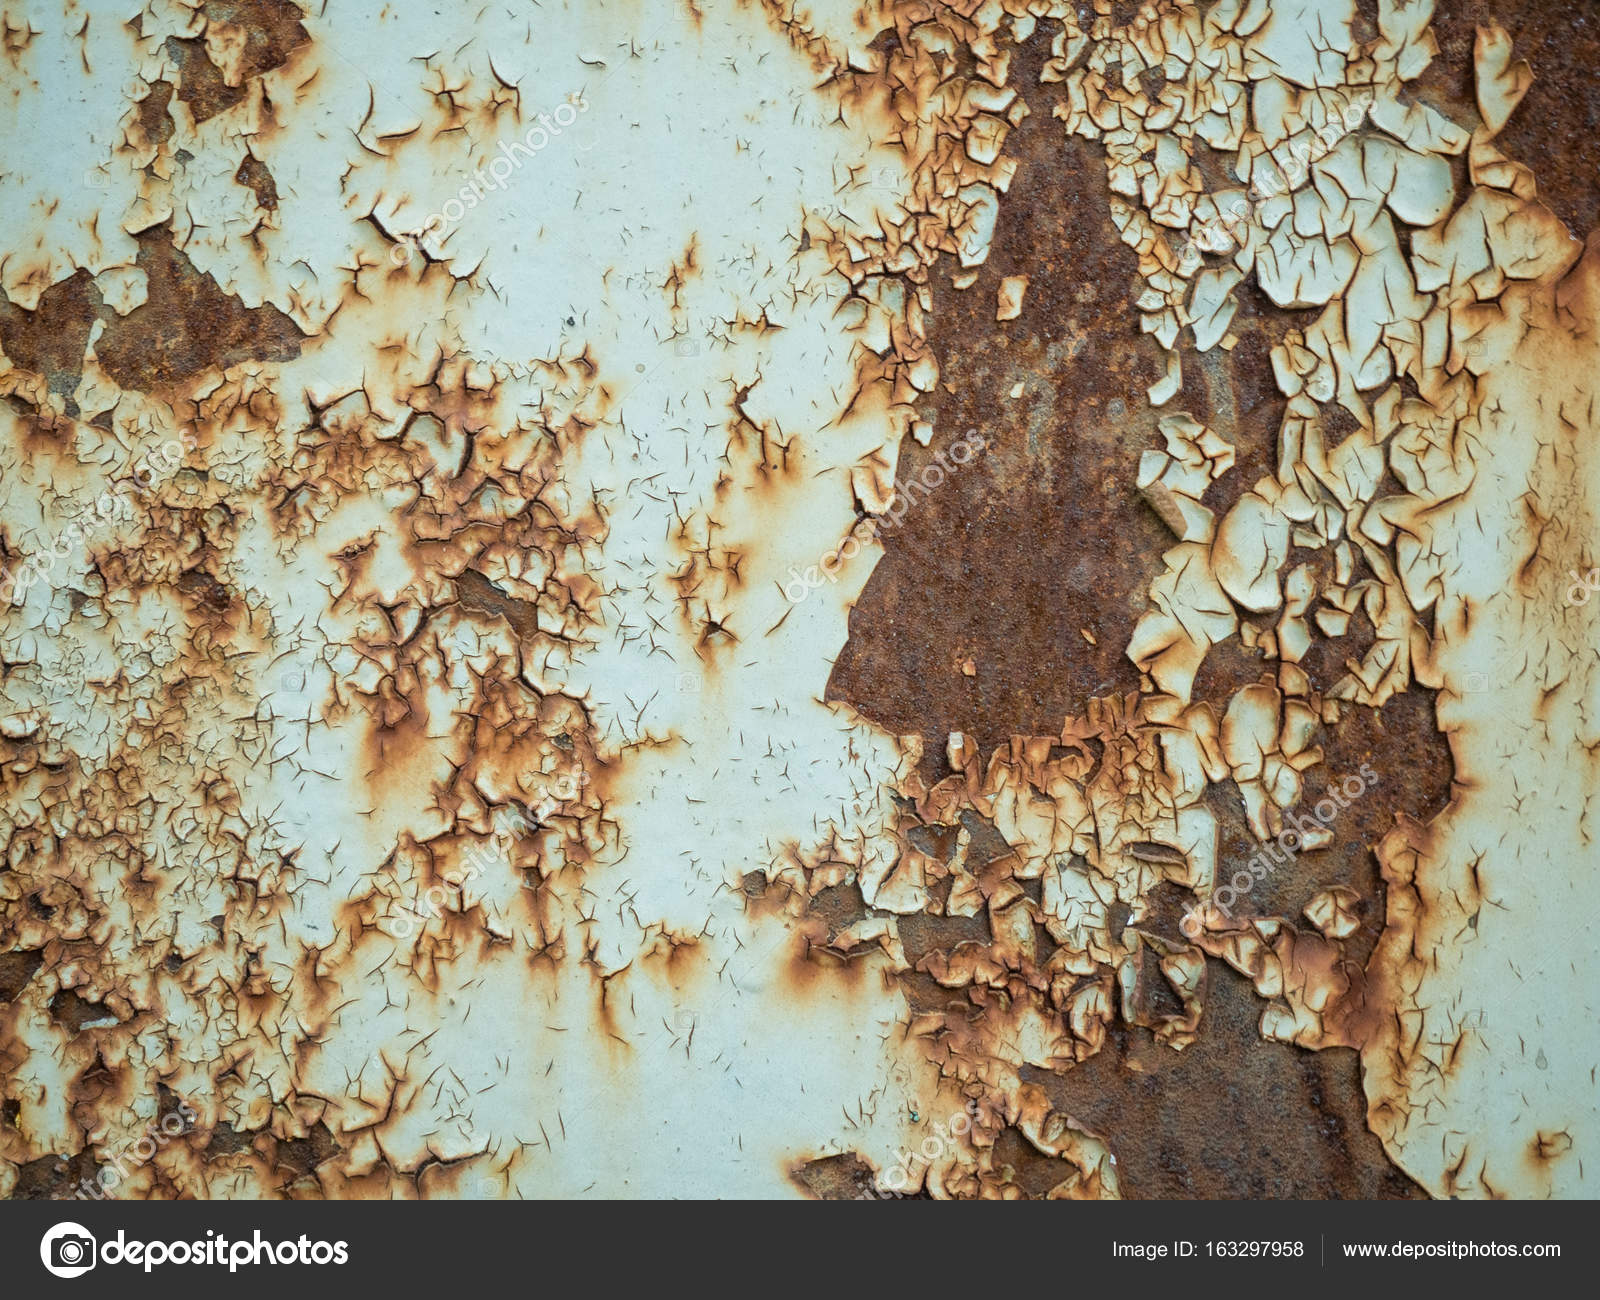 Texture of old rusty metal with streaks of rust and cracked, flaking ...